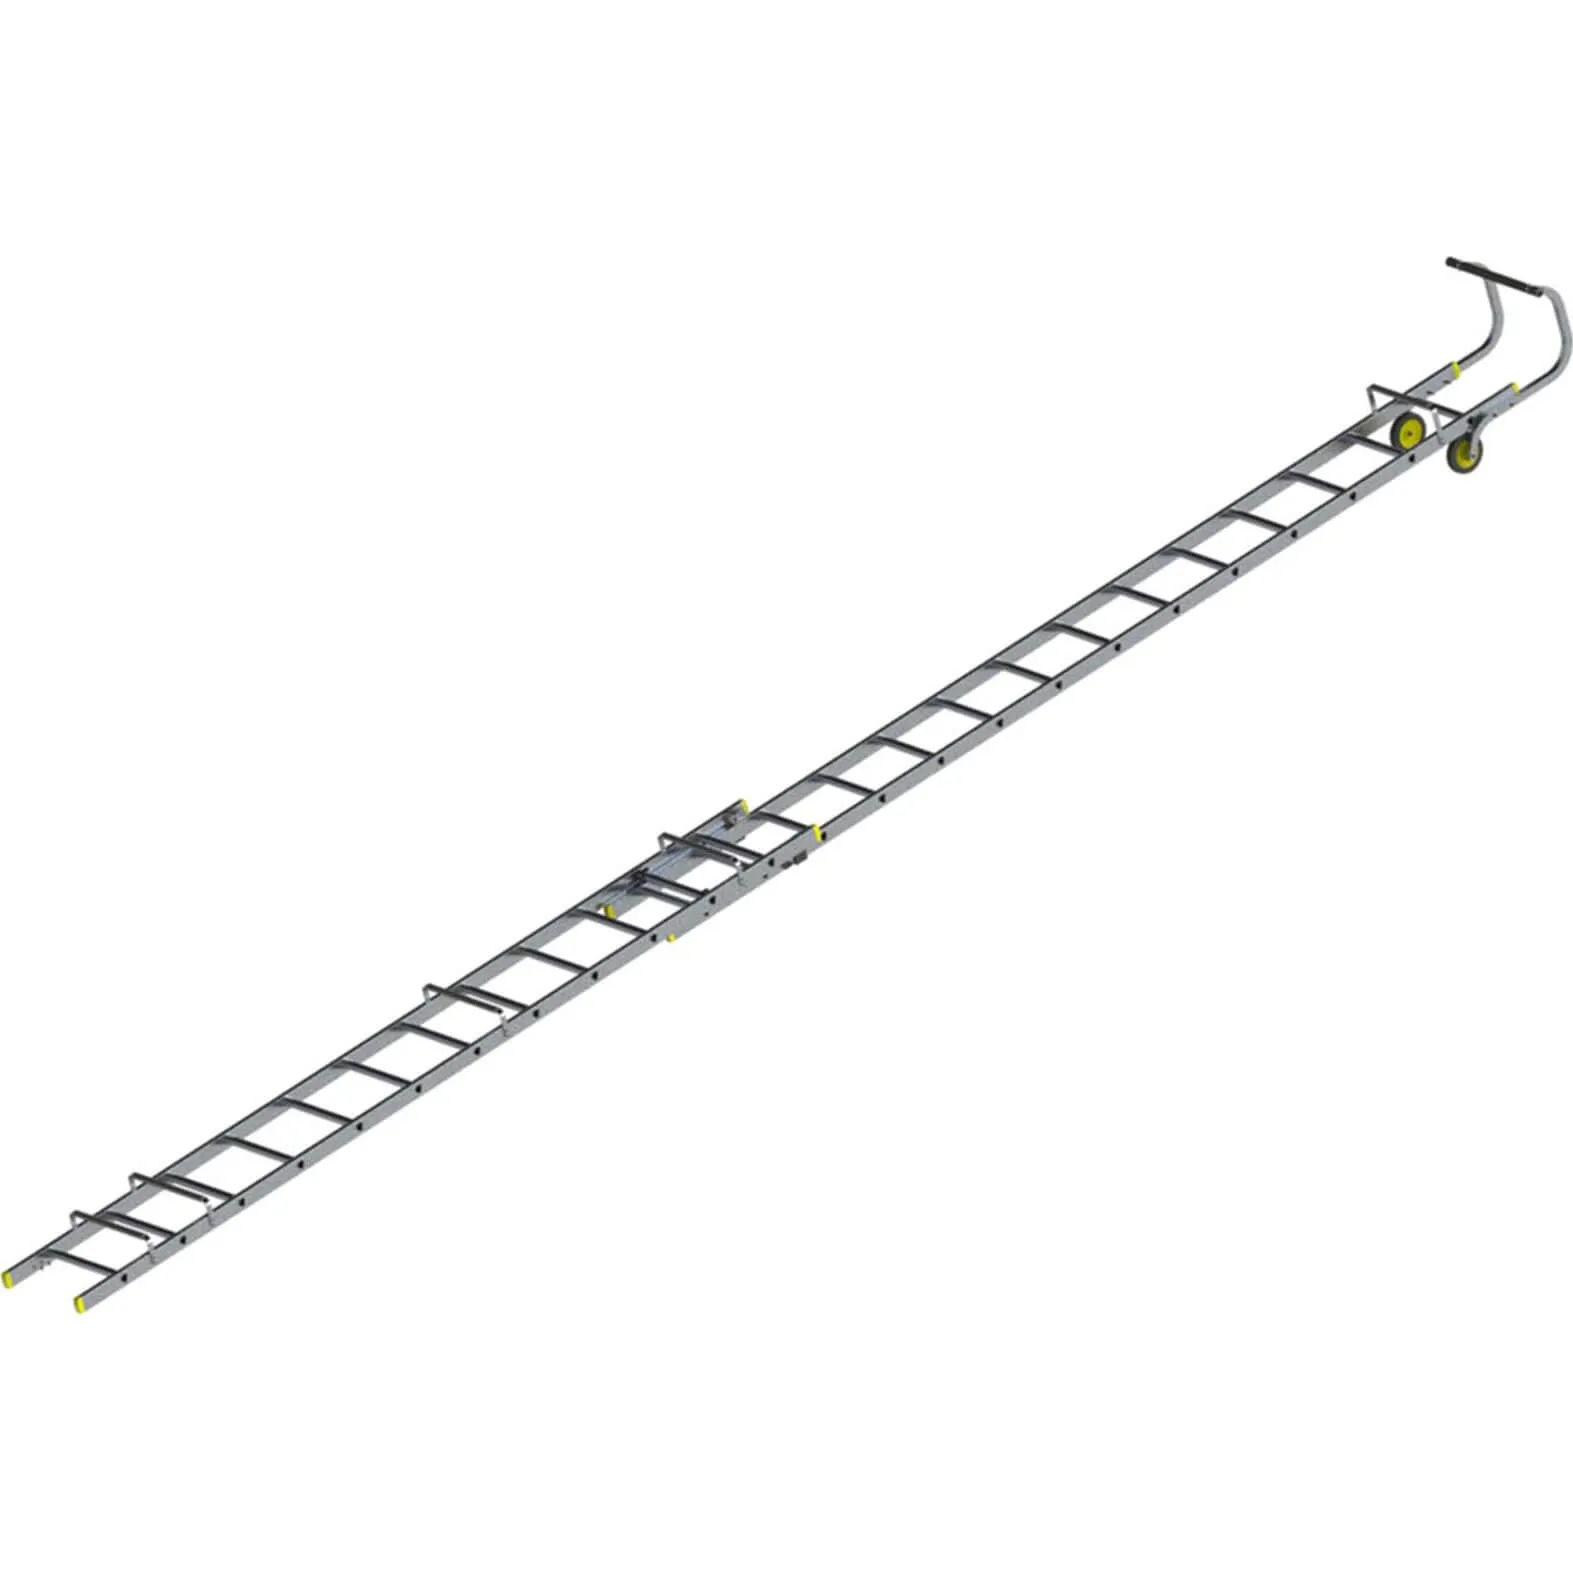 Youngman 2 Section Roof Ladder - 26